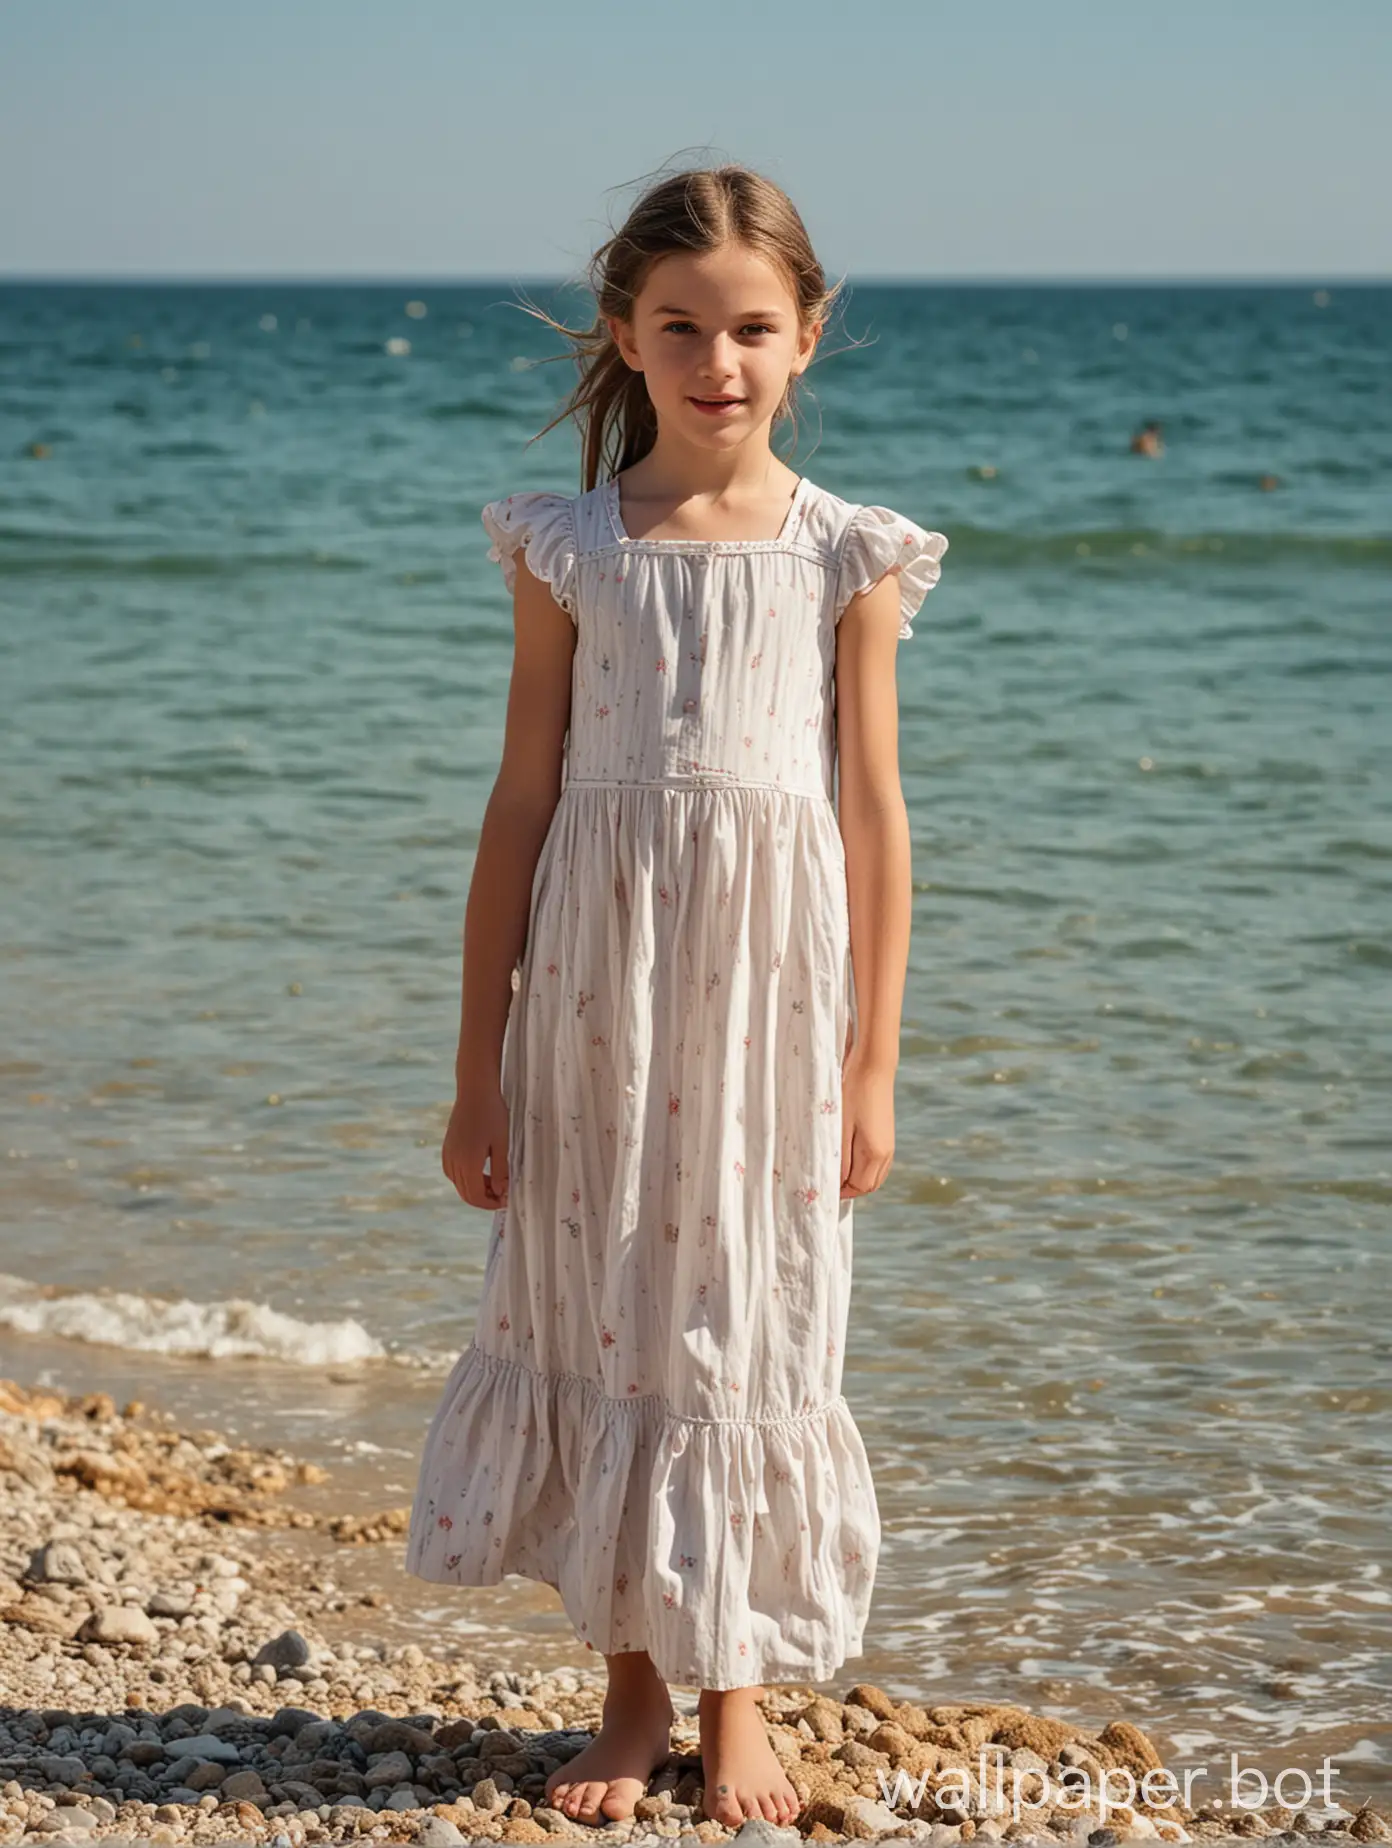 girl 9 years old in France by the sea, people in the background, full growth, coquetry, dynamic poses, front view, full length